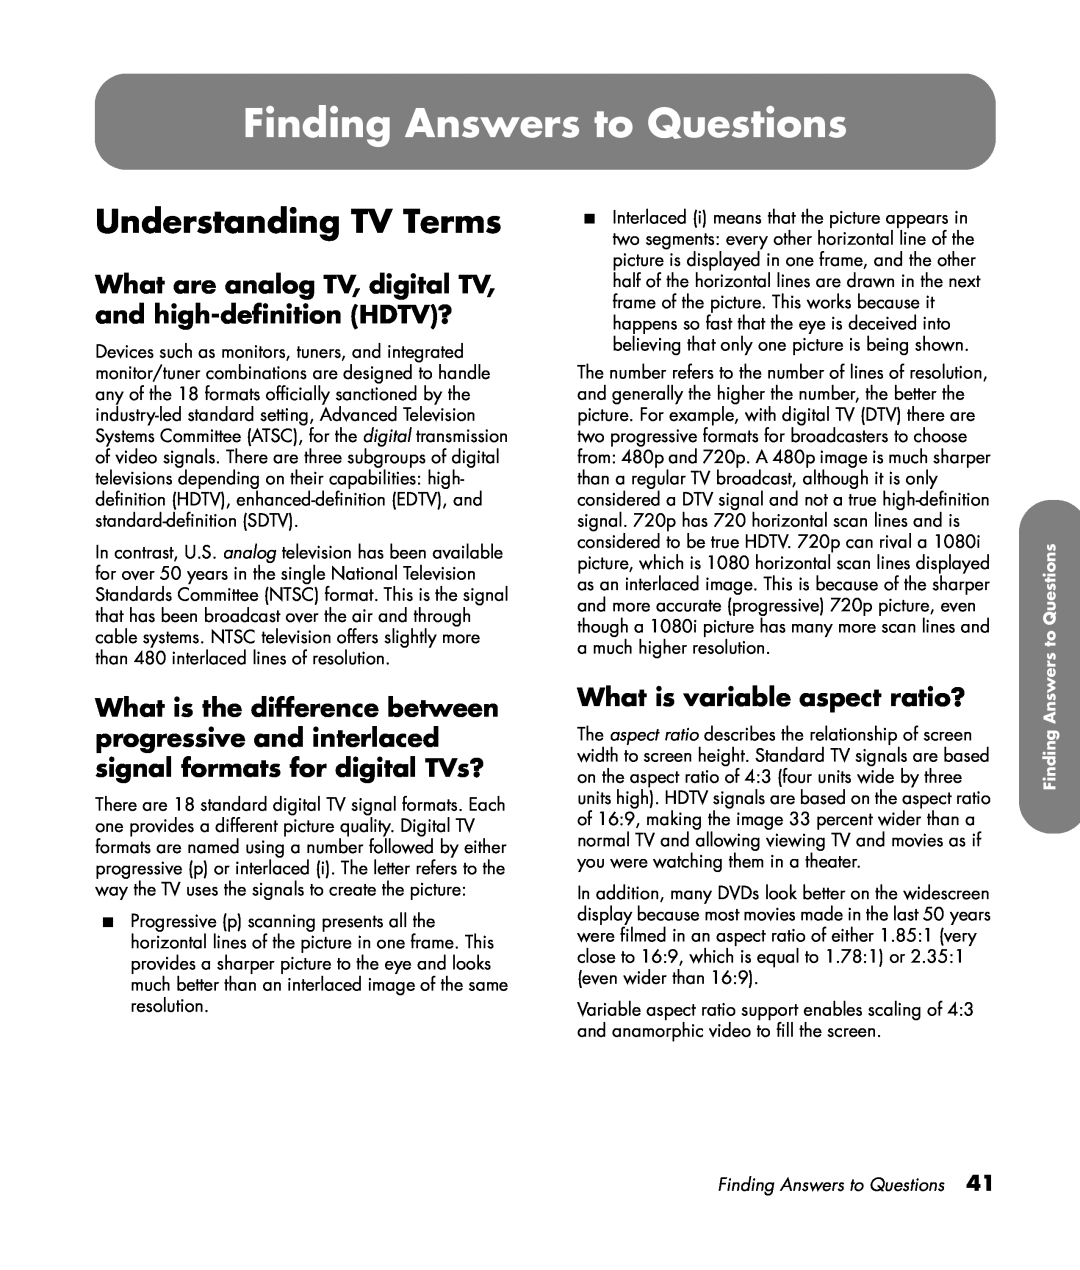 HP PL4260N 42 inch Plasma manual Finding Answers to Questions, Understanding TV Terms, What is variable aspect ratio? 